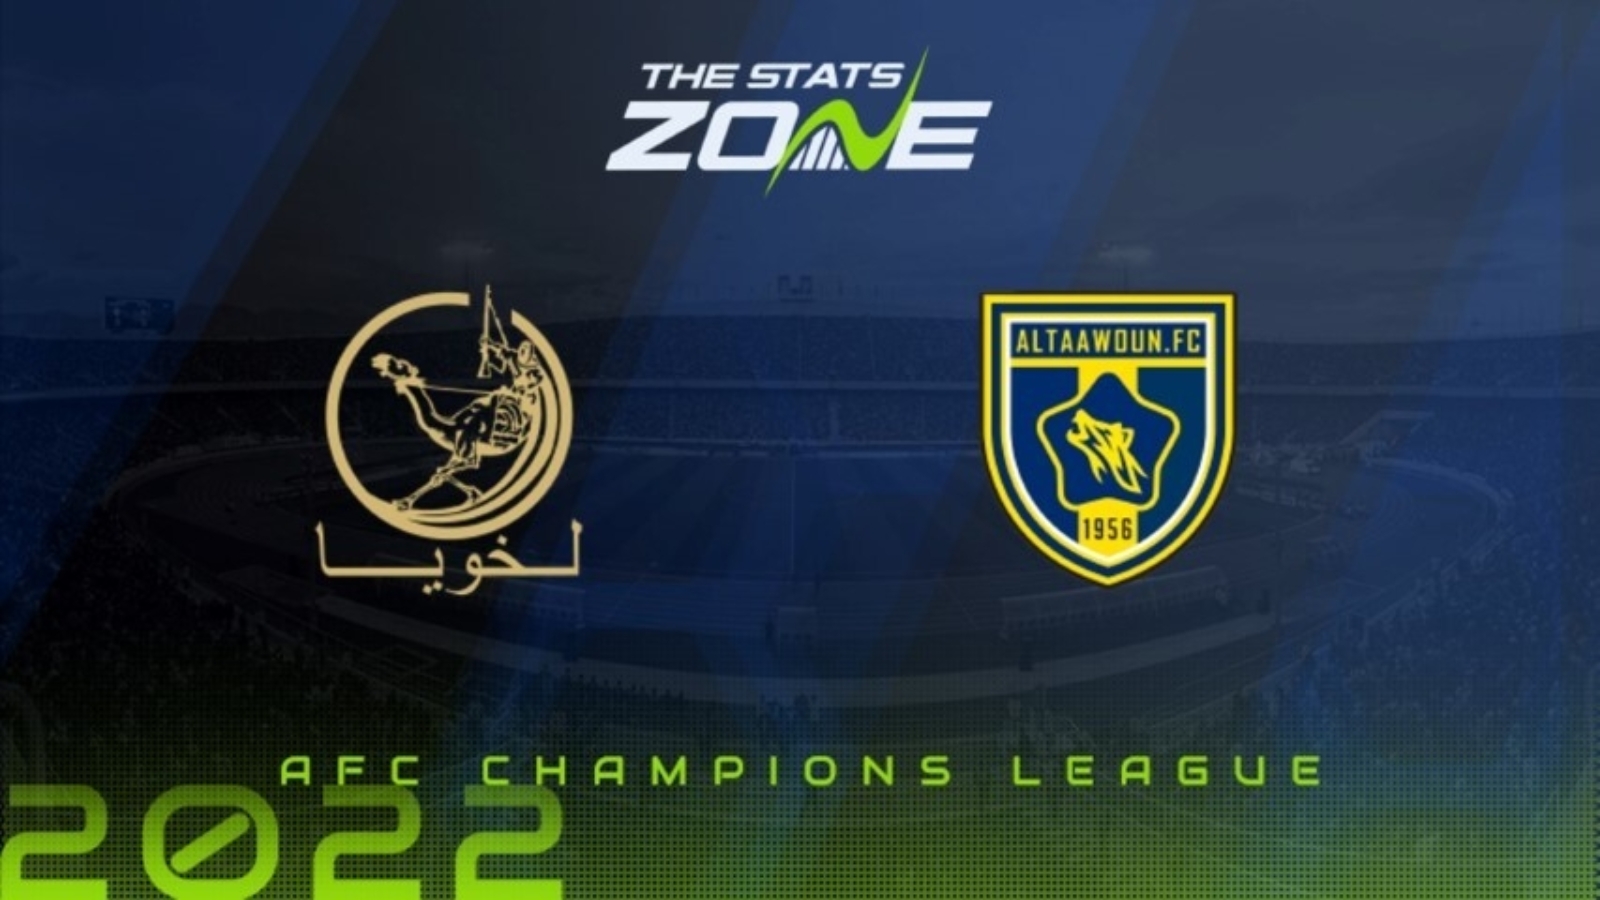 Persepolis Al Duhail predictions, where to watch, live